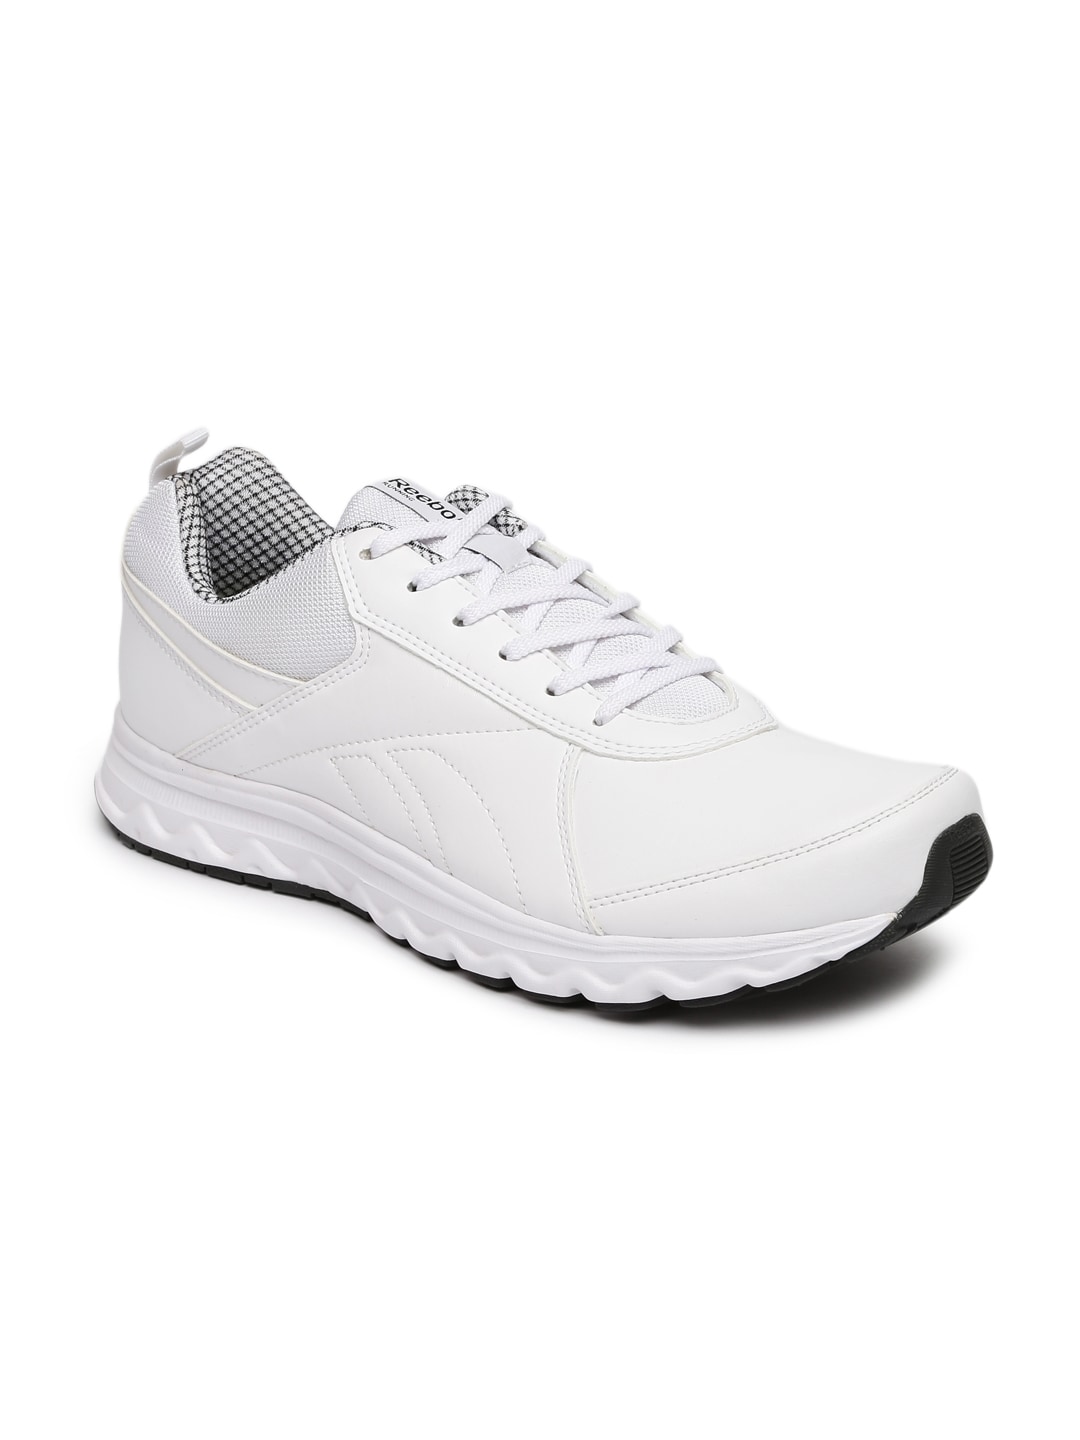 reebok sports shoes with price in india 